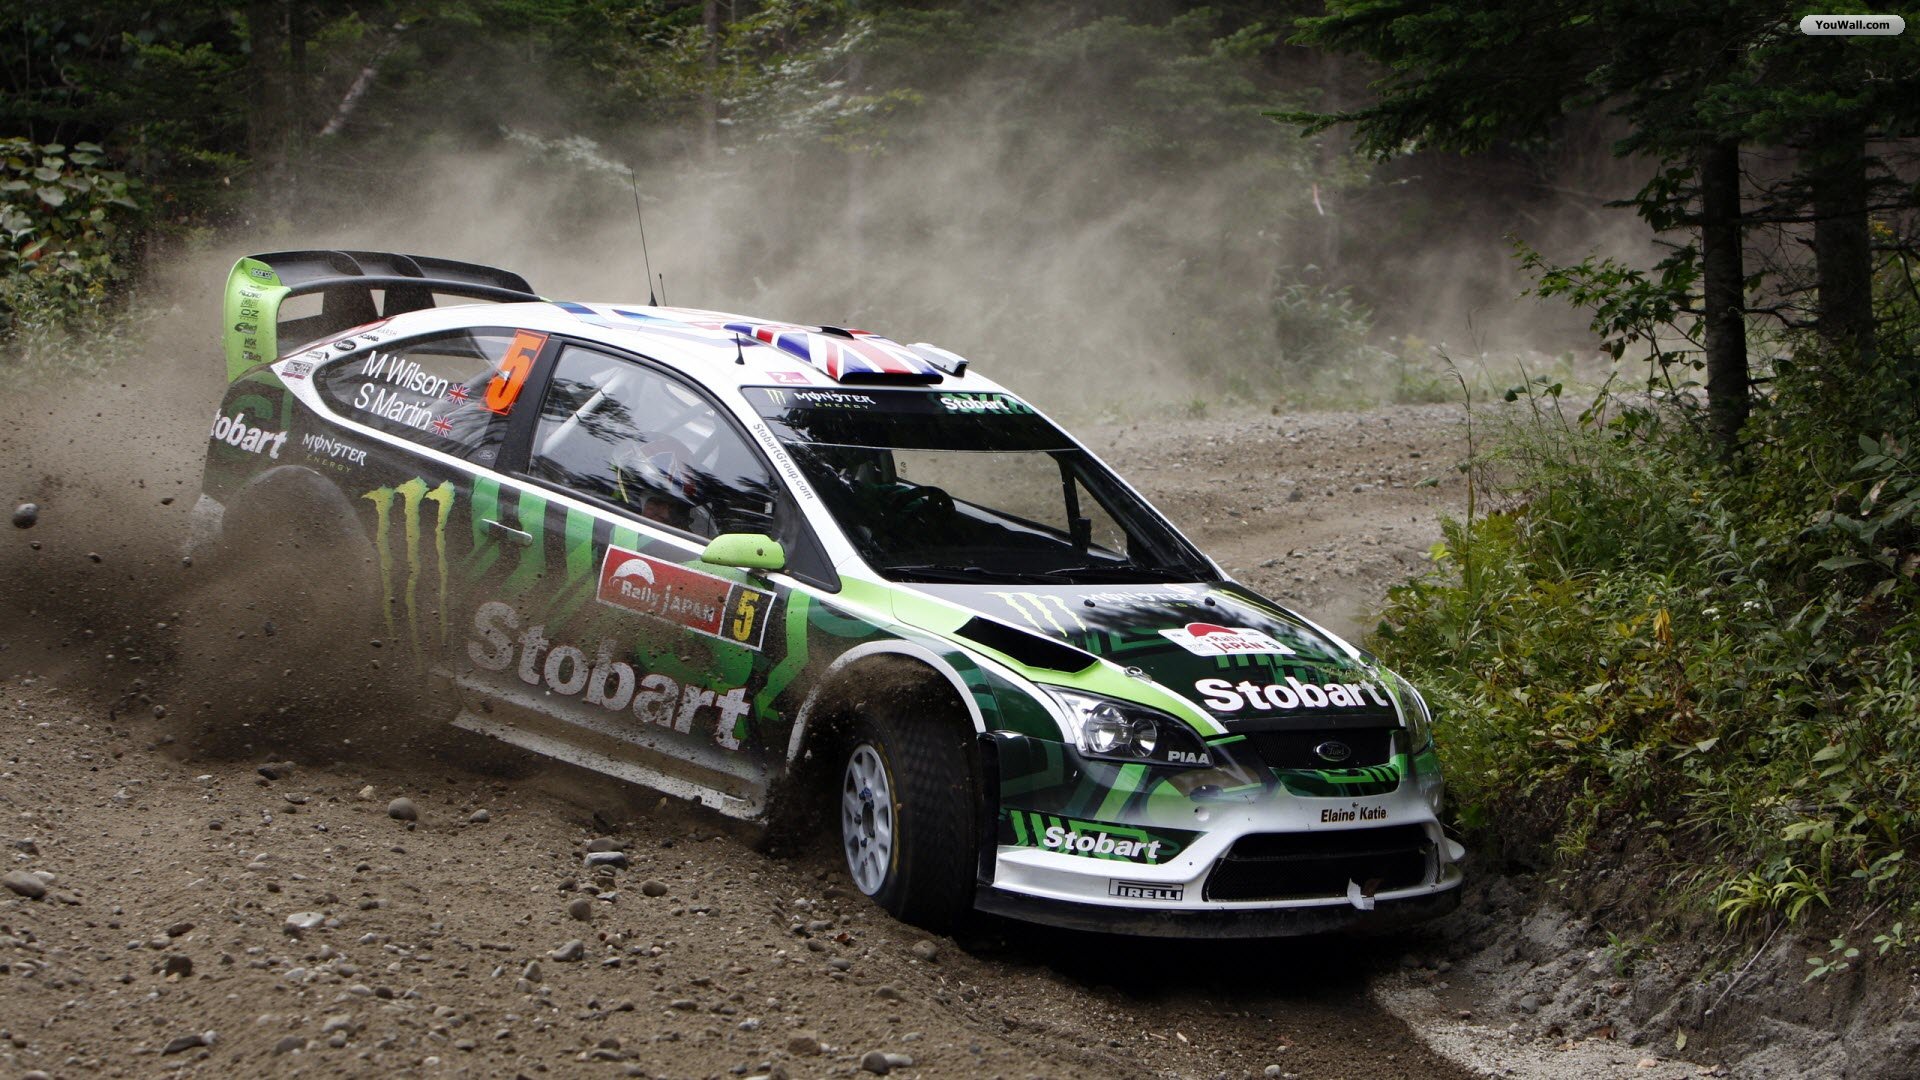 Rally Car Wallpapers